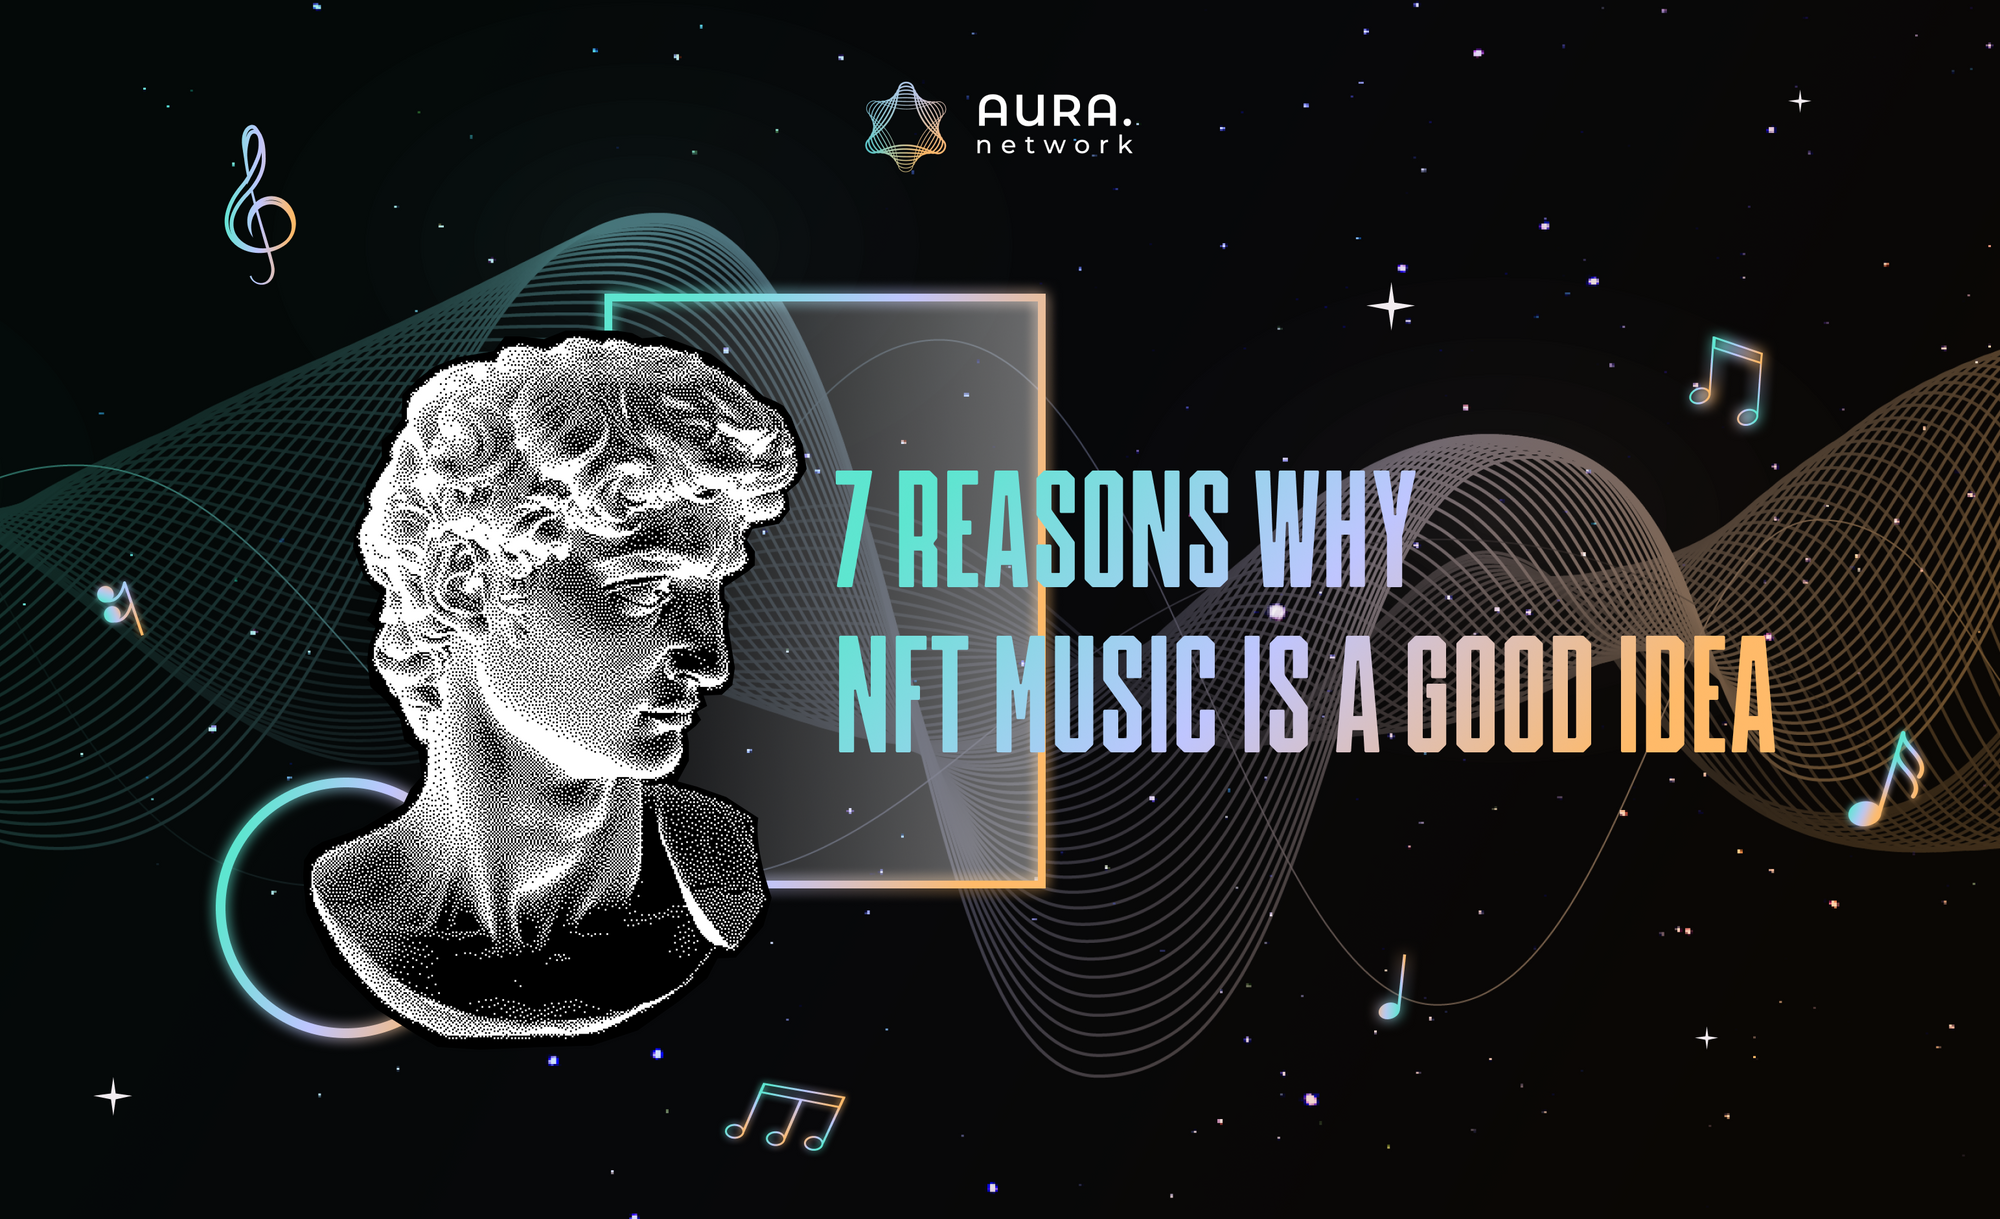 7 reasons why NFT music is a good idea